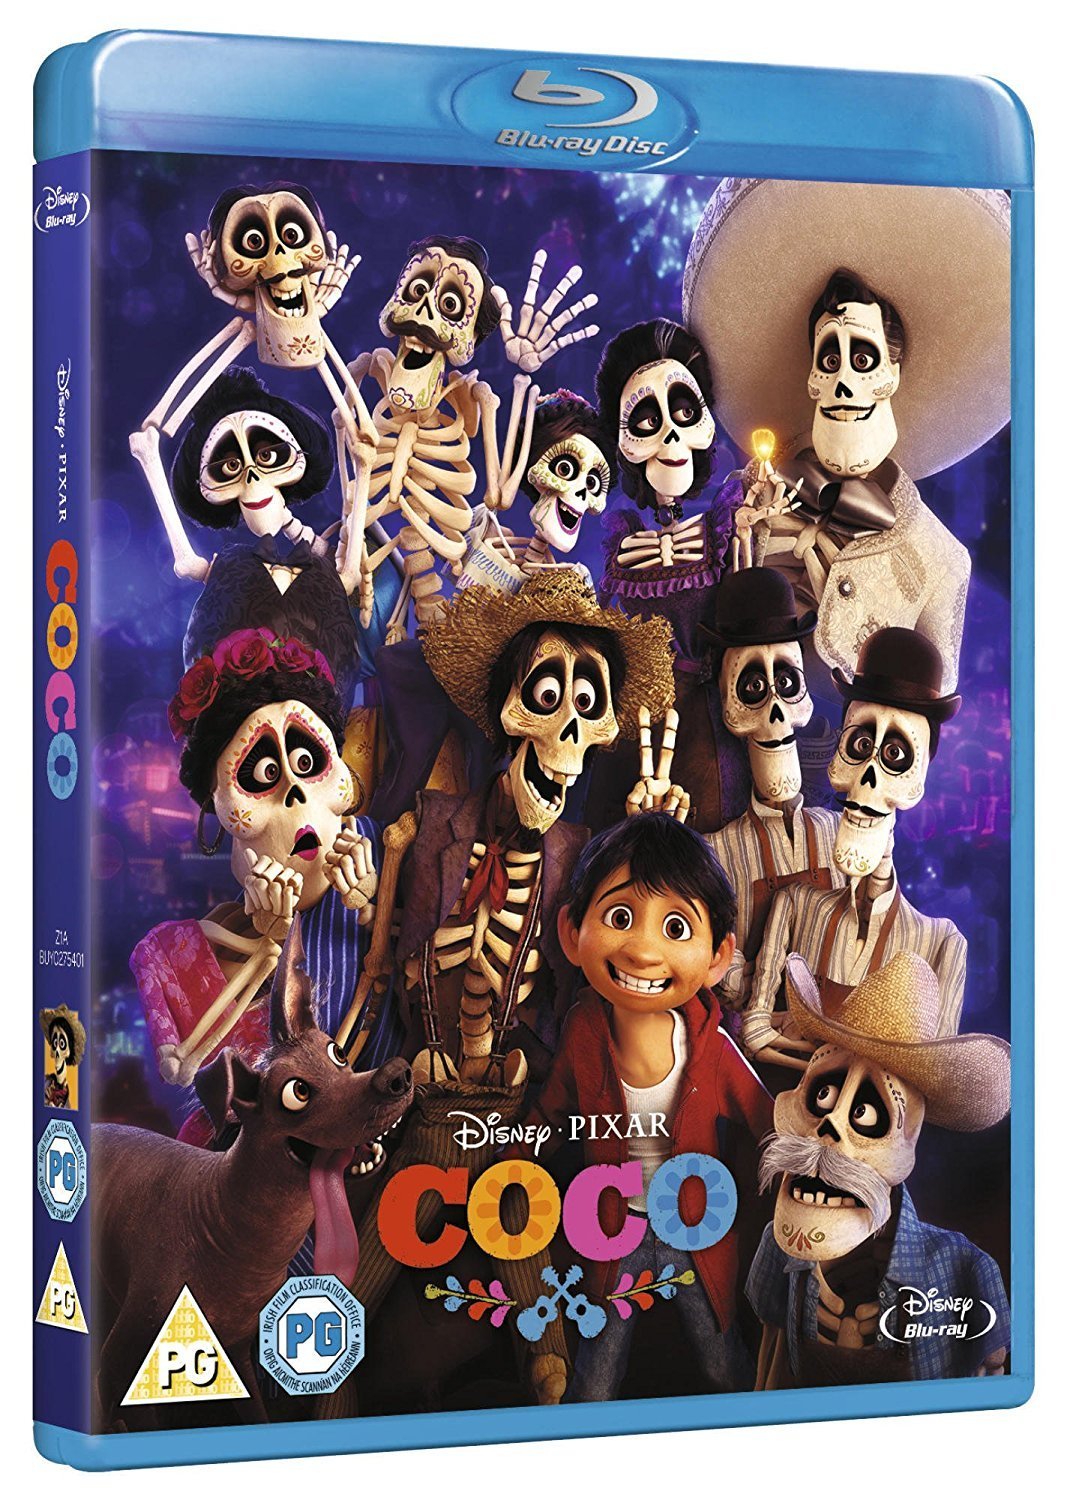 boom competitions - win Coco on Blu-ray